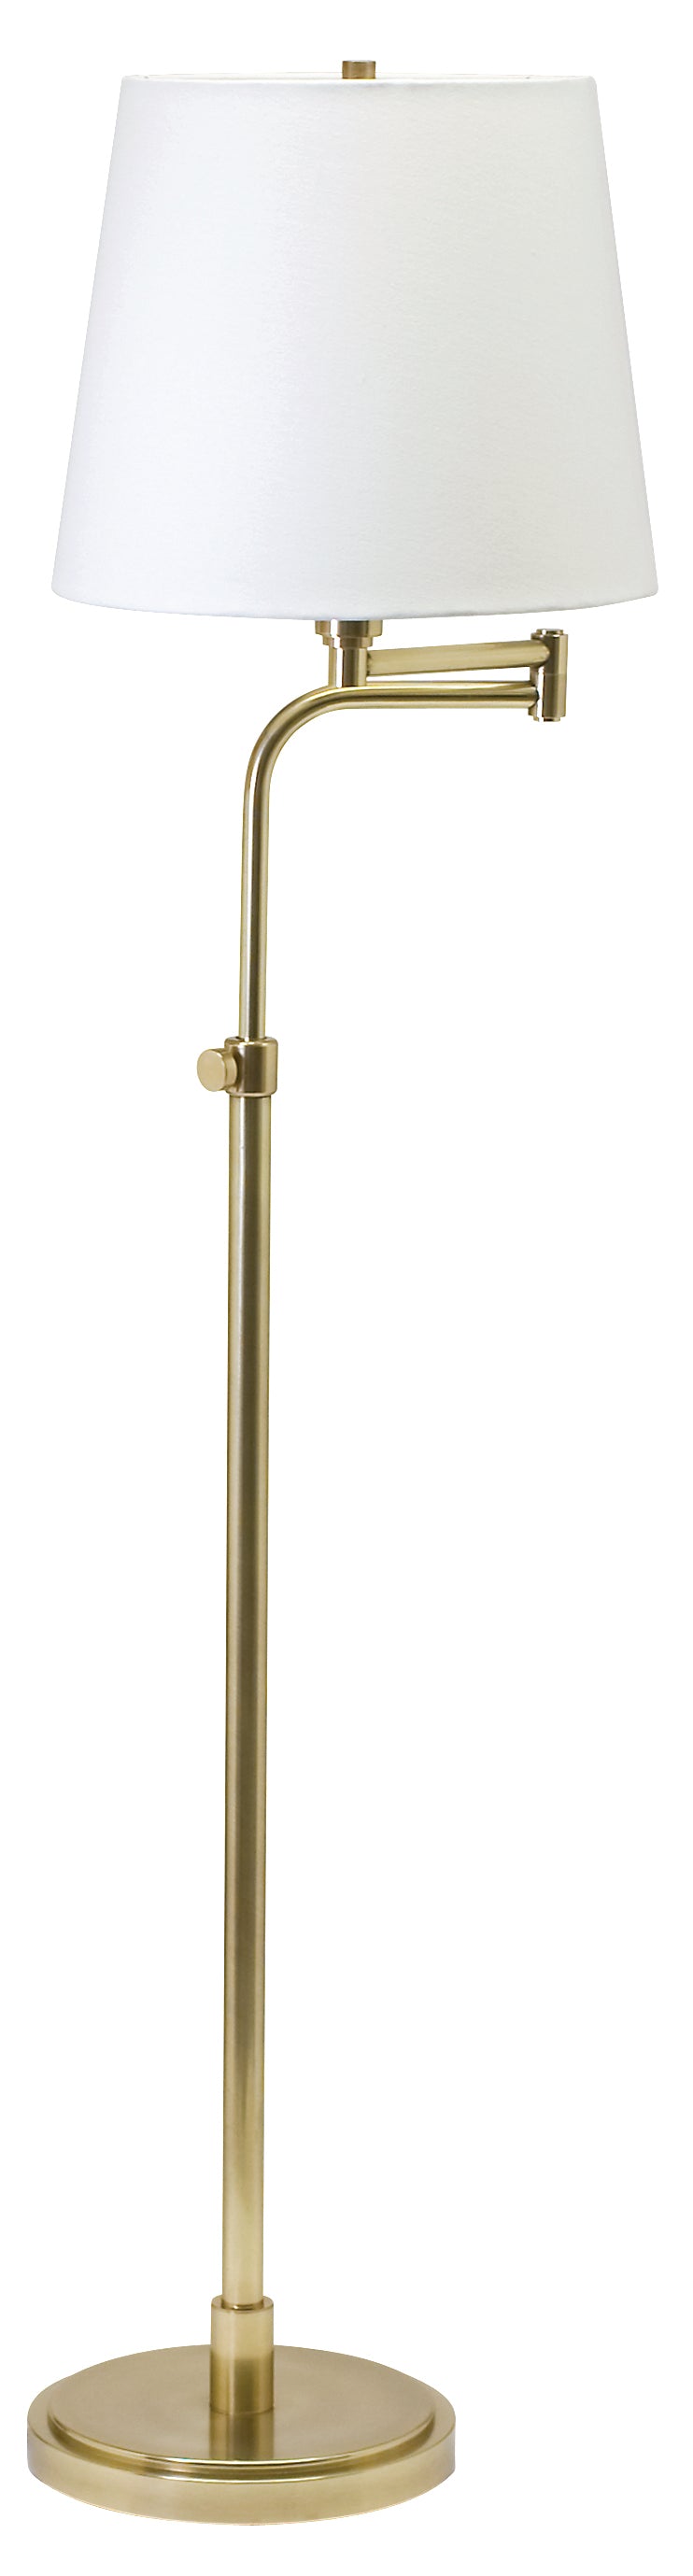 House of Troy Townhouse Adjustable Swing Arm Floor Lamp Raw Brass TH700-RB